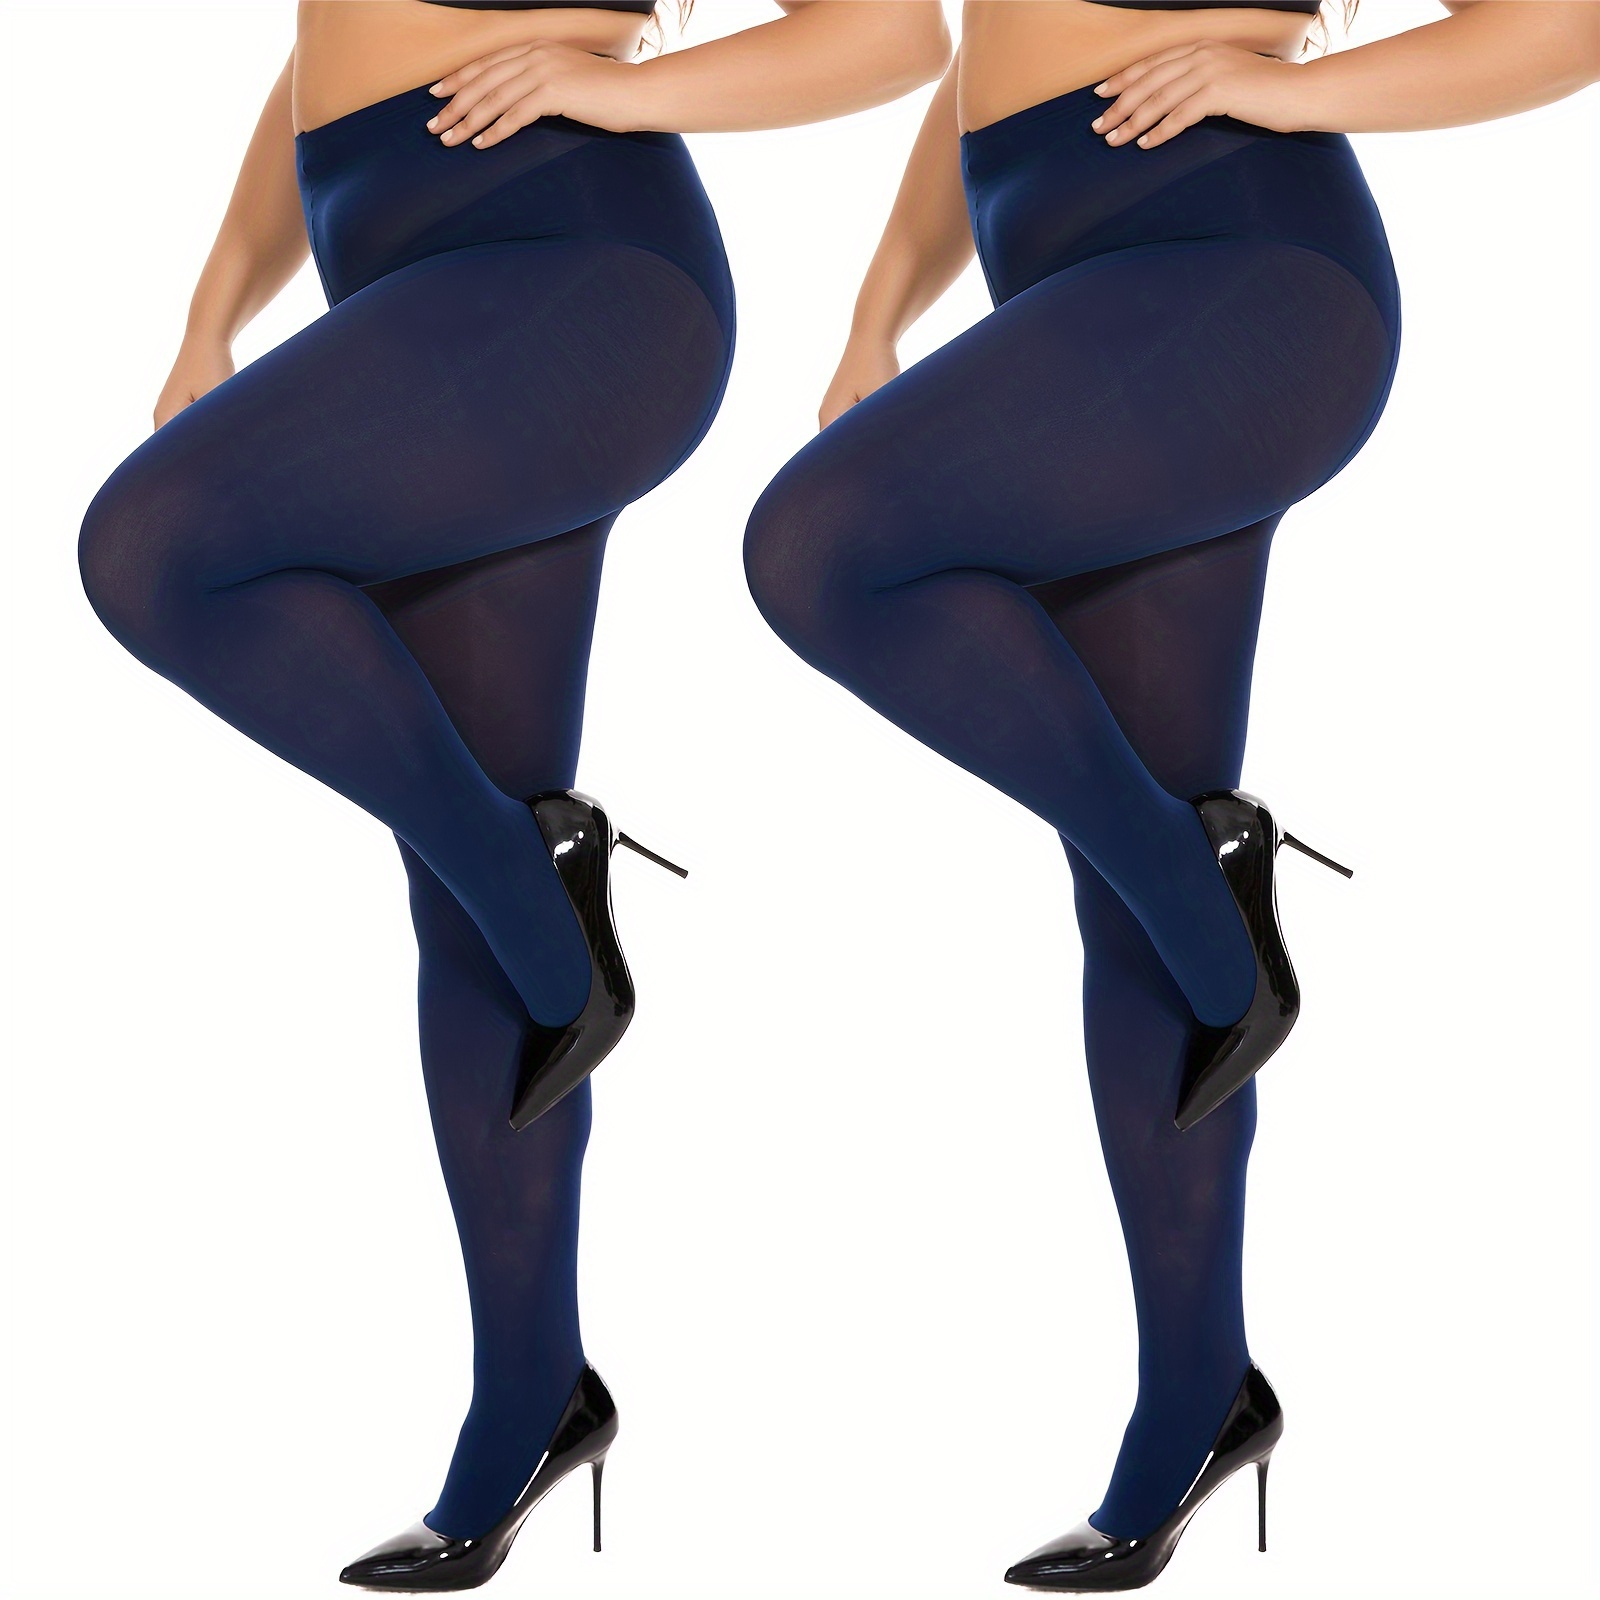 Selma: Navy Blue Opaque Thigh High Stockings. Petite to Plus Size